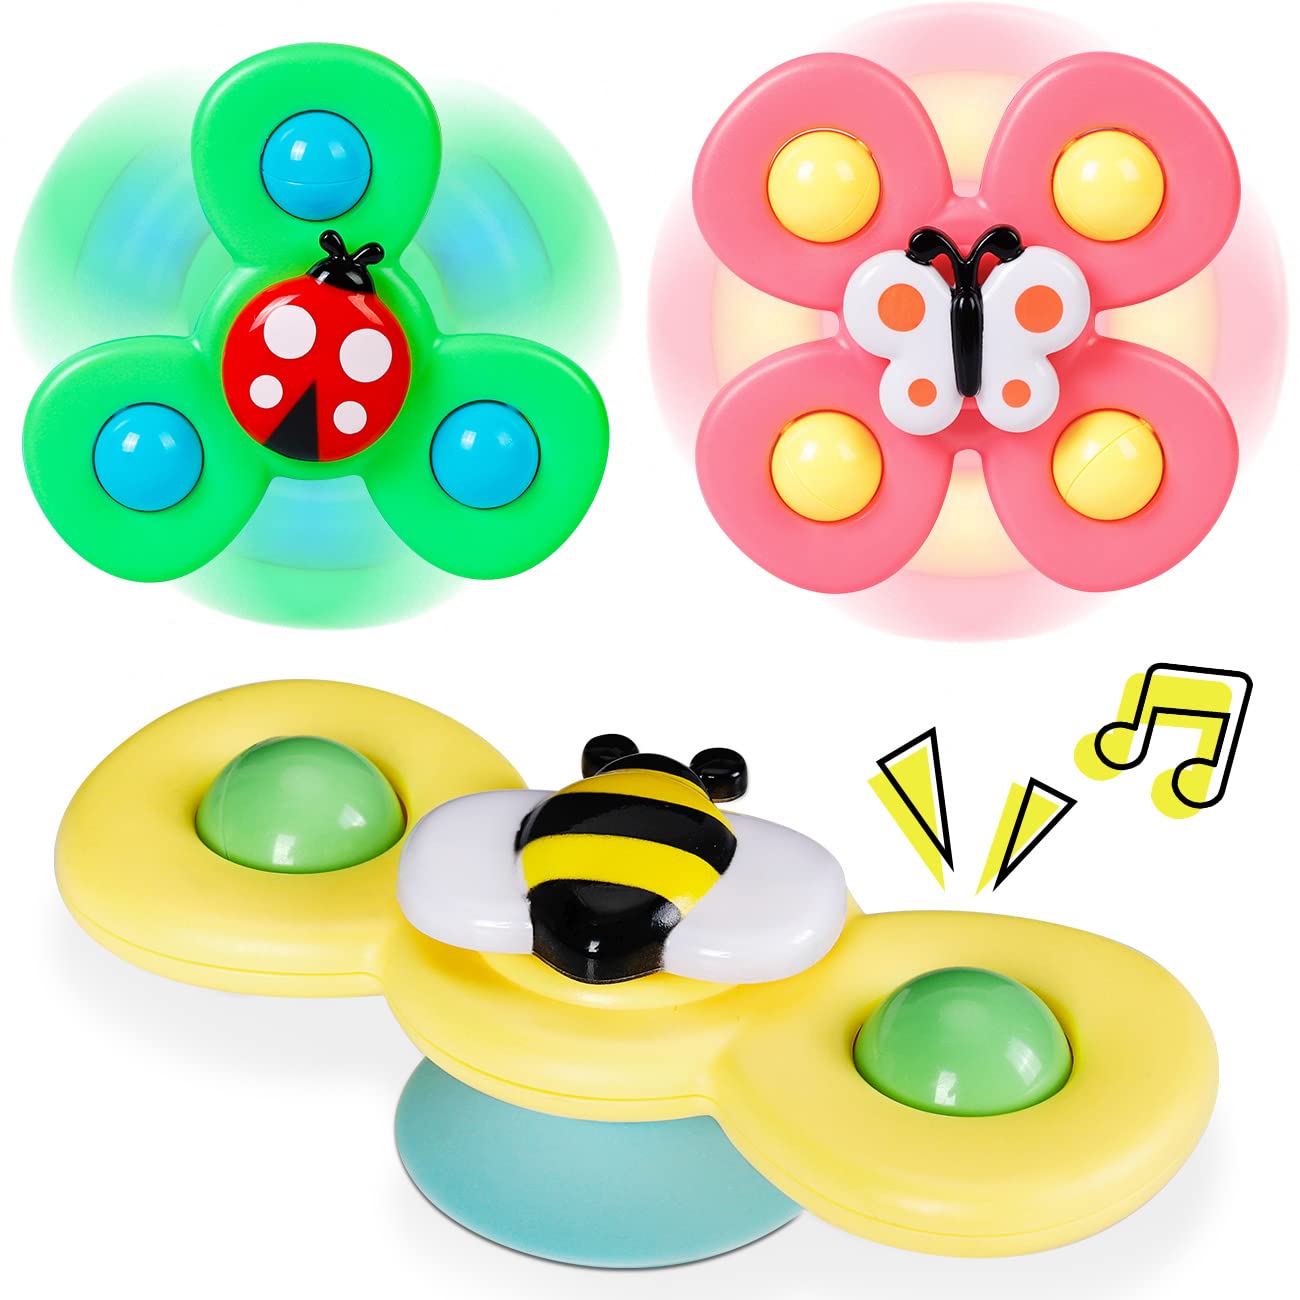 NARRIO Suction Cup Spinner Toys for 1 Year Old Boy, Spinning top Baby Toys 12-18 Months, First Christmas Birthday Baby Gifts for 1 Year